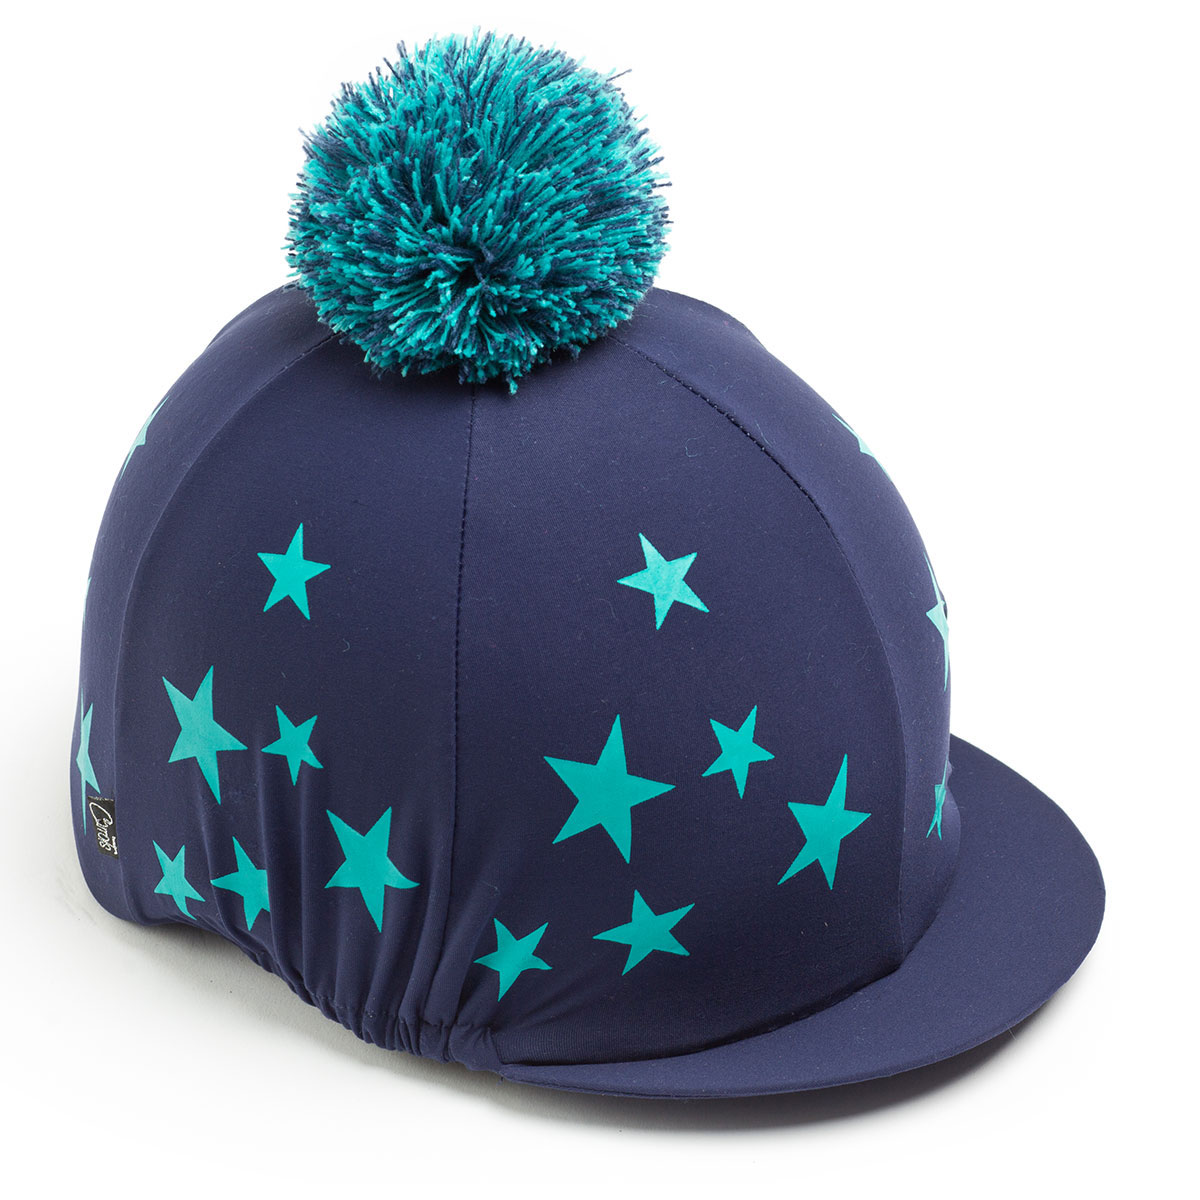 Carrots Navy/Teal Star Hat Cover Navy & Teal